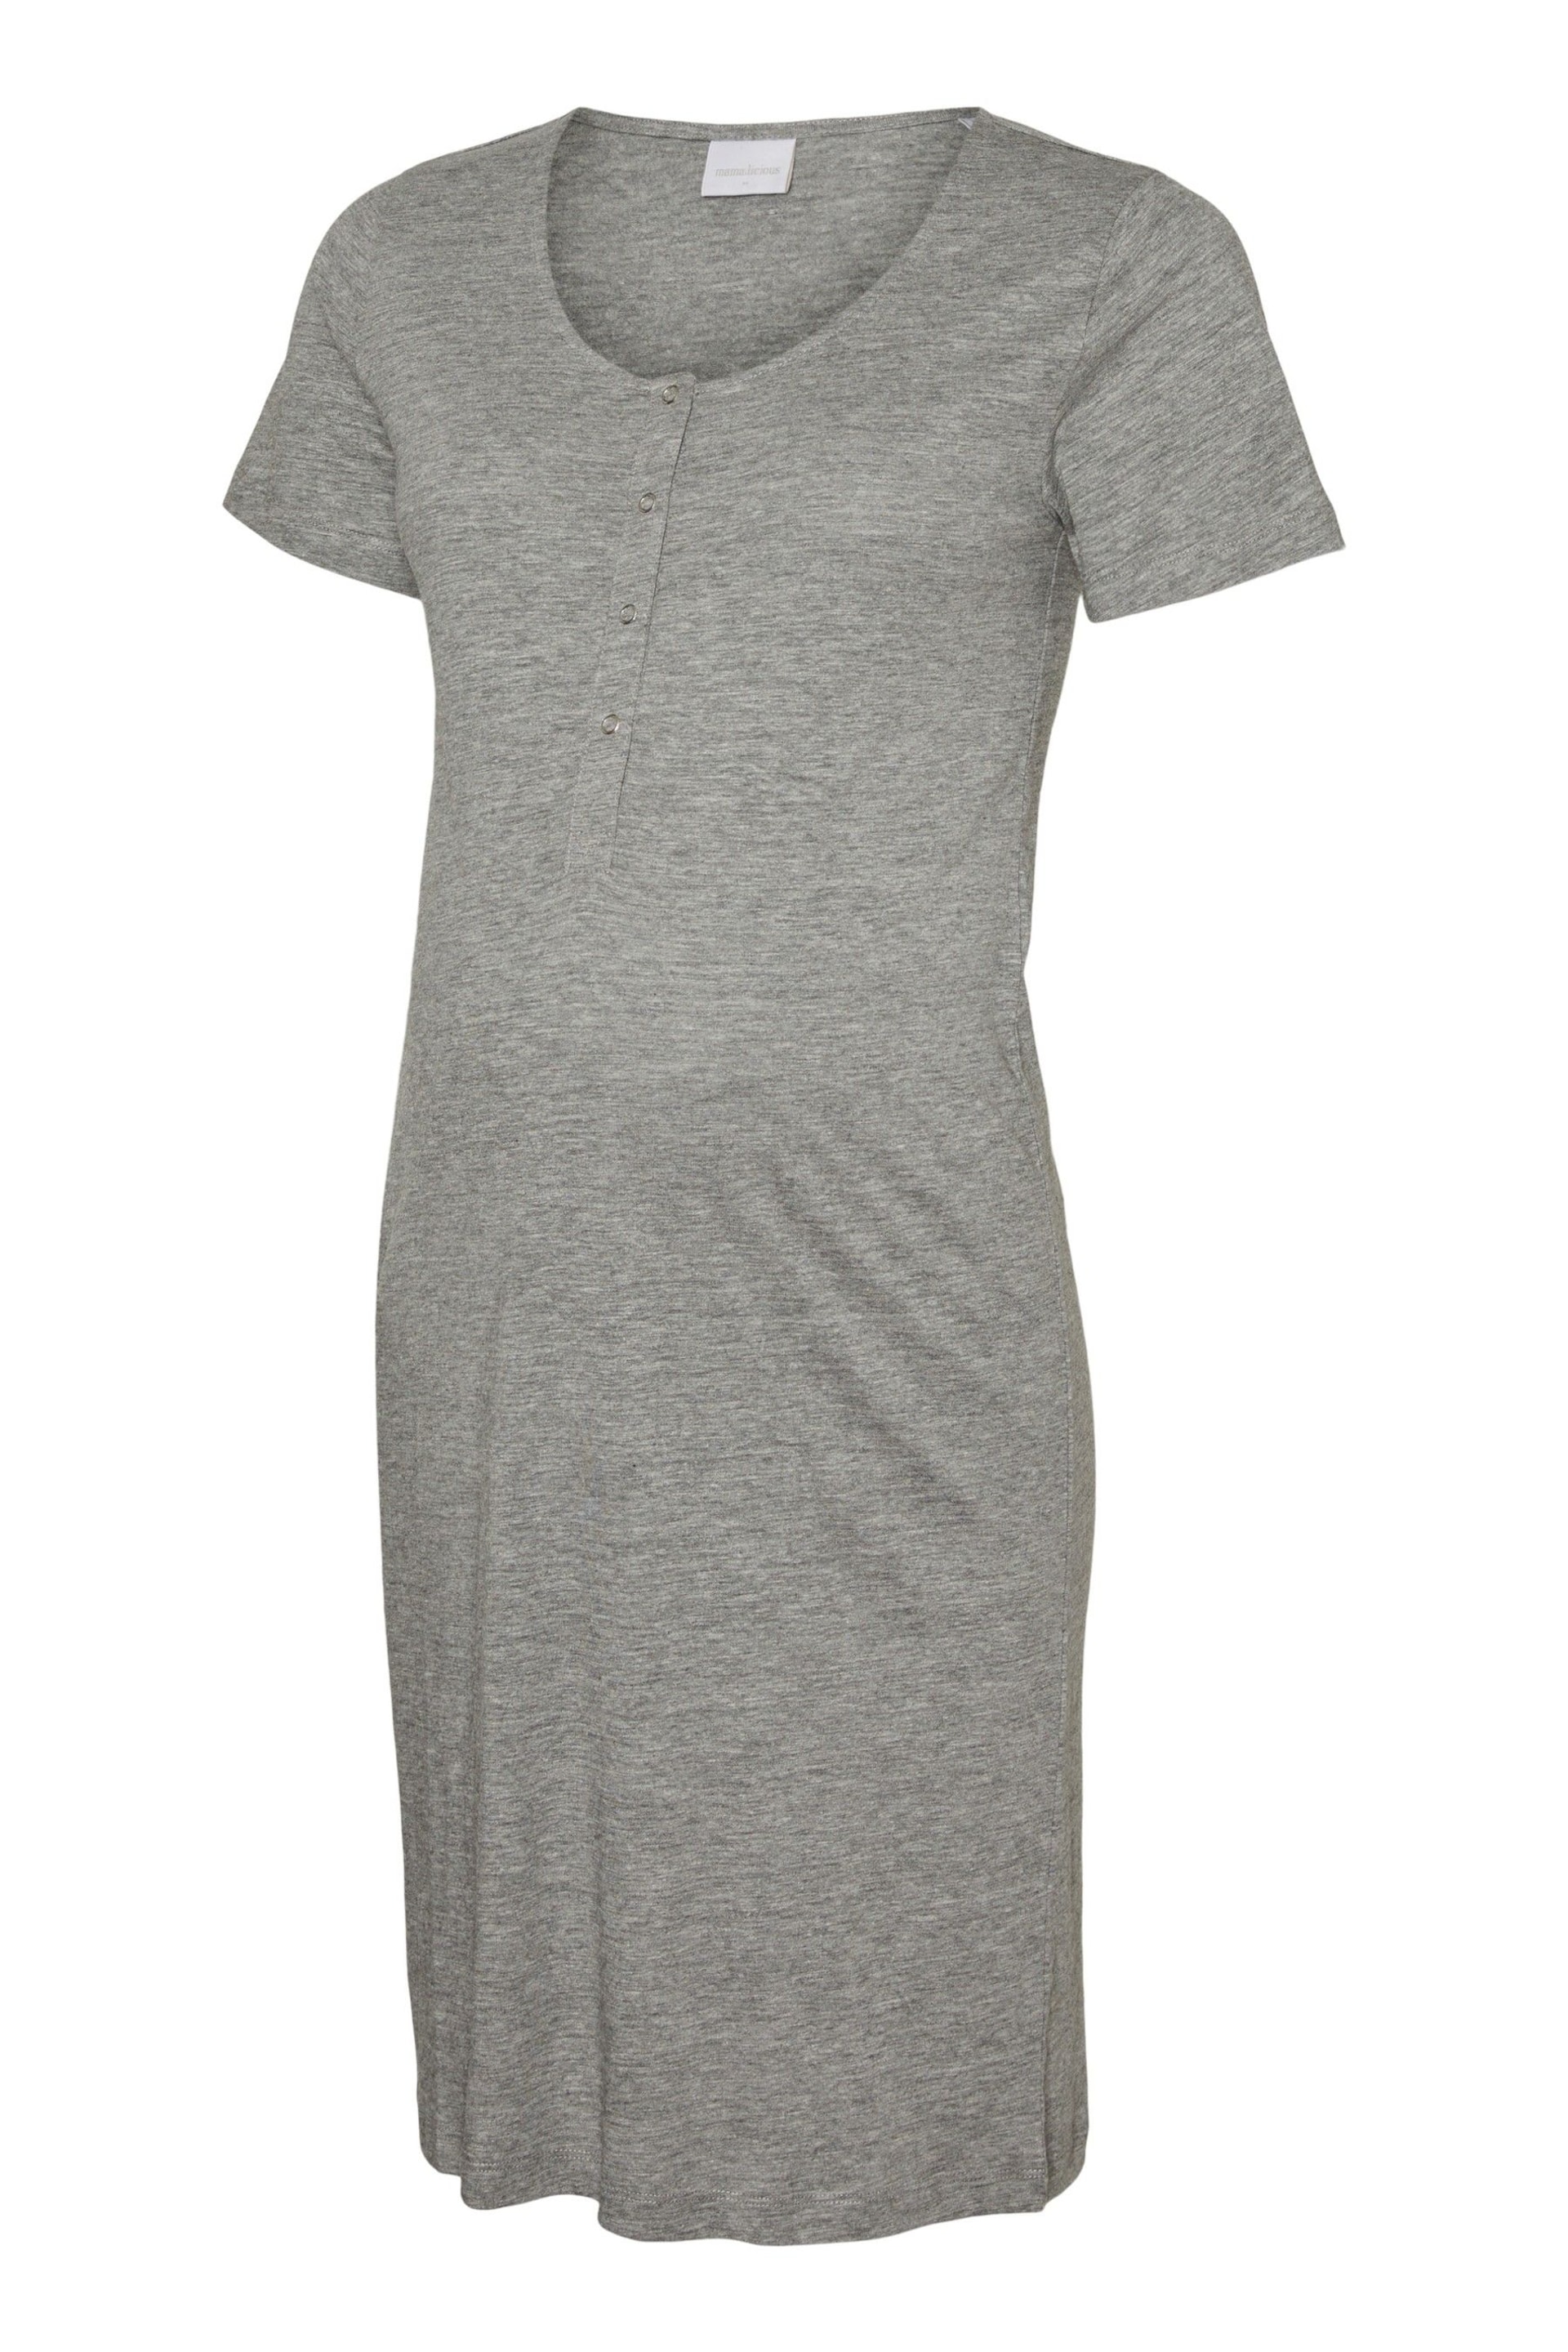 Mamalicious Grey Maternity Button Front Comfort Night Dress With Nursing Function - Image 6 of 6